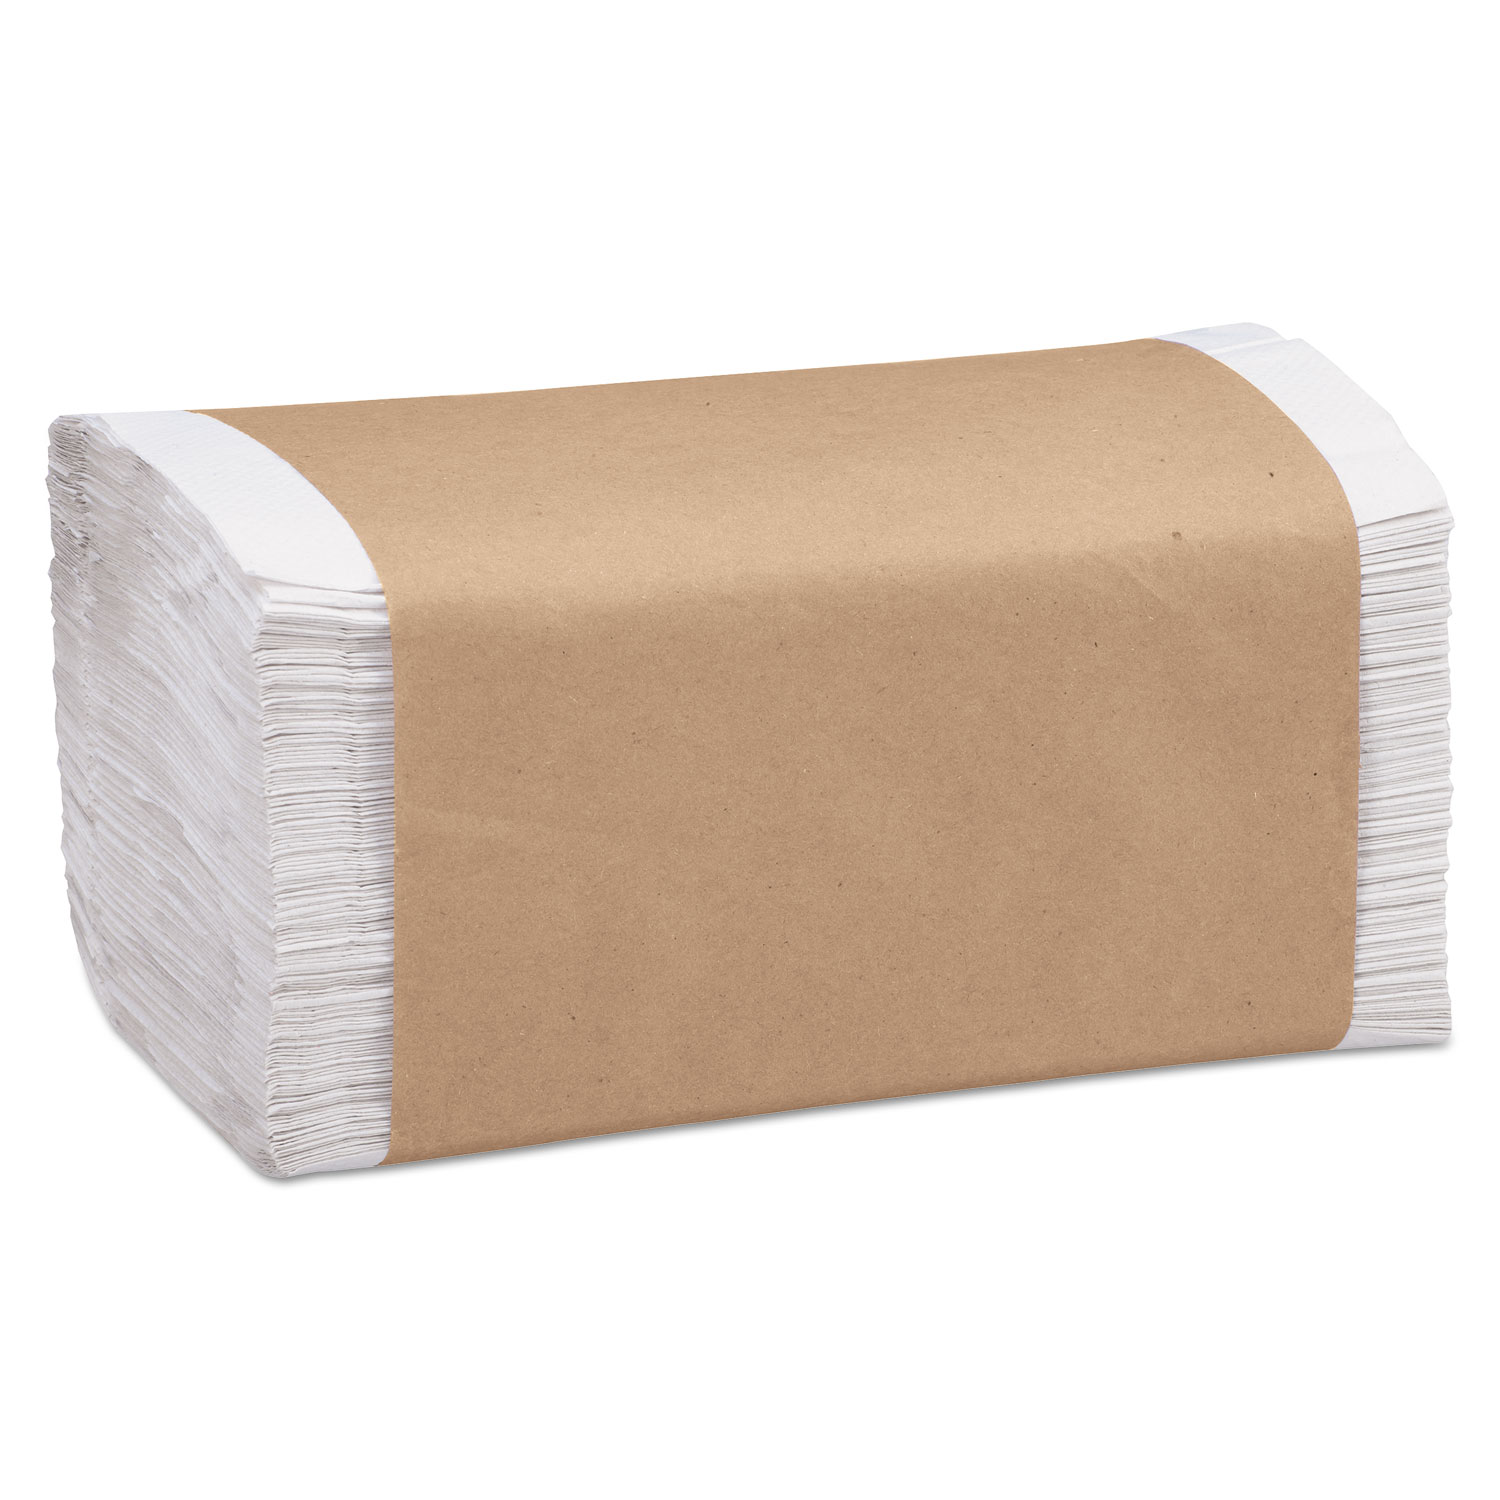  Marcal PRO P600B 100% Recycled Folded Paper Towels, 1-Ply, 8.62 x 10 1/4, White, 334/PK, 12PK/CT (MRCP6002B) 